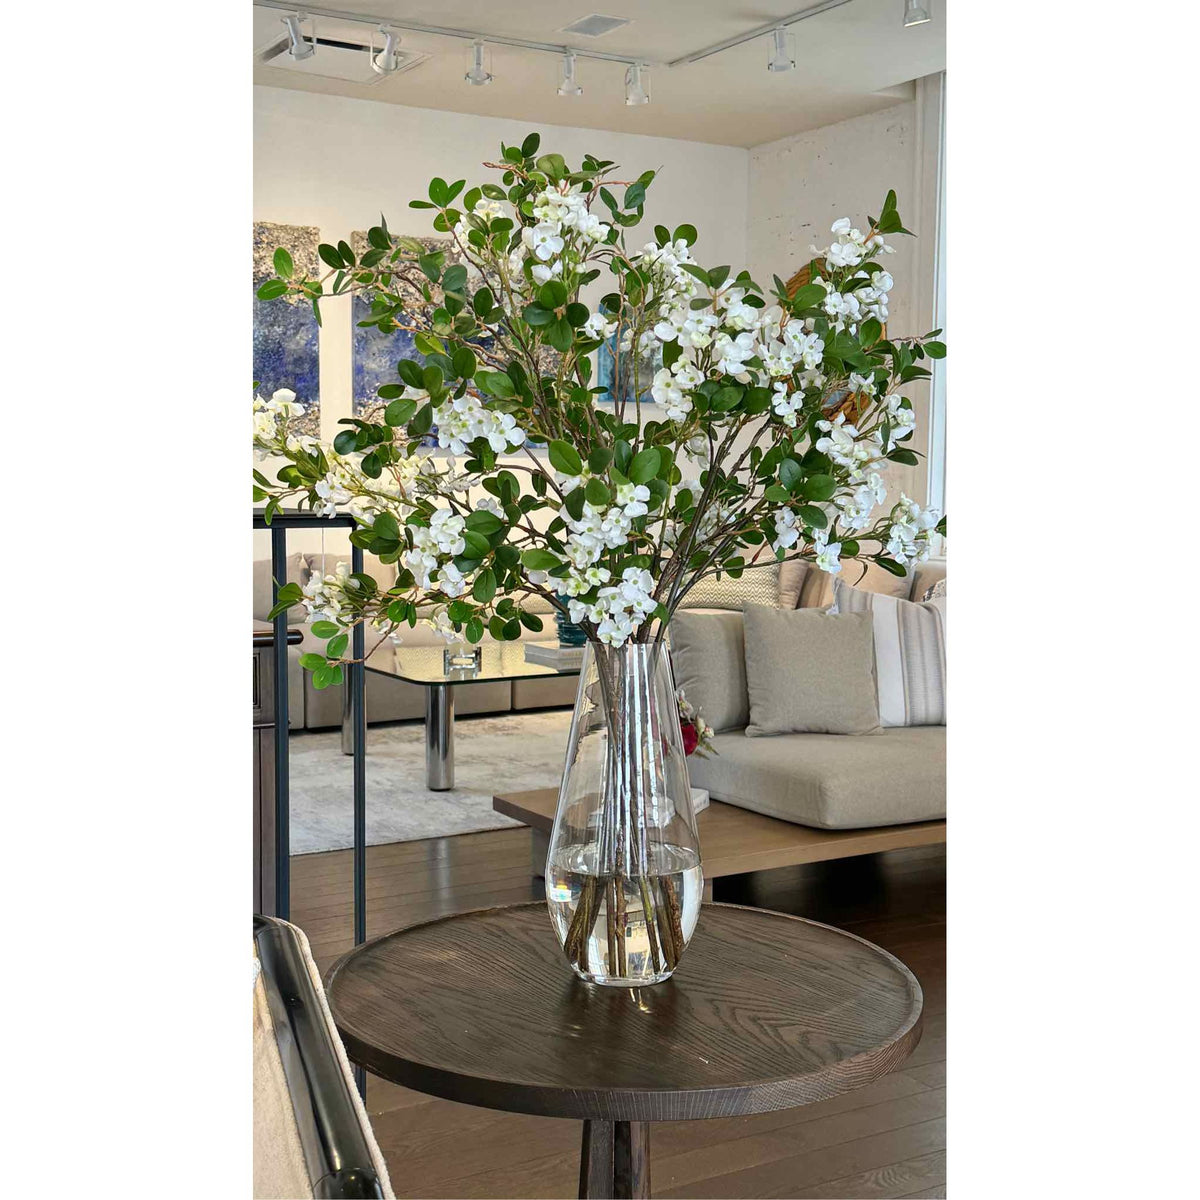 BLOSSLF.GLS - White blossom and leaf bouquet in teardrop vase